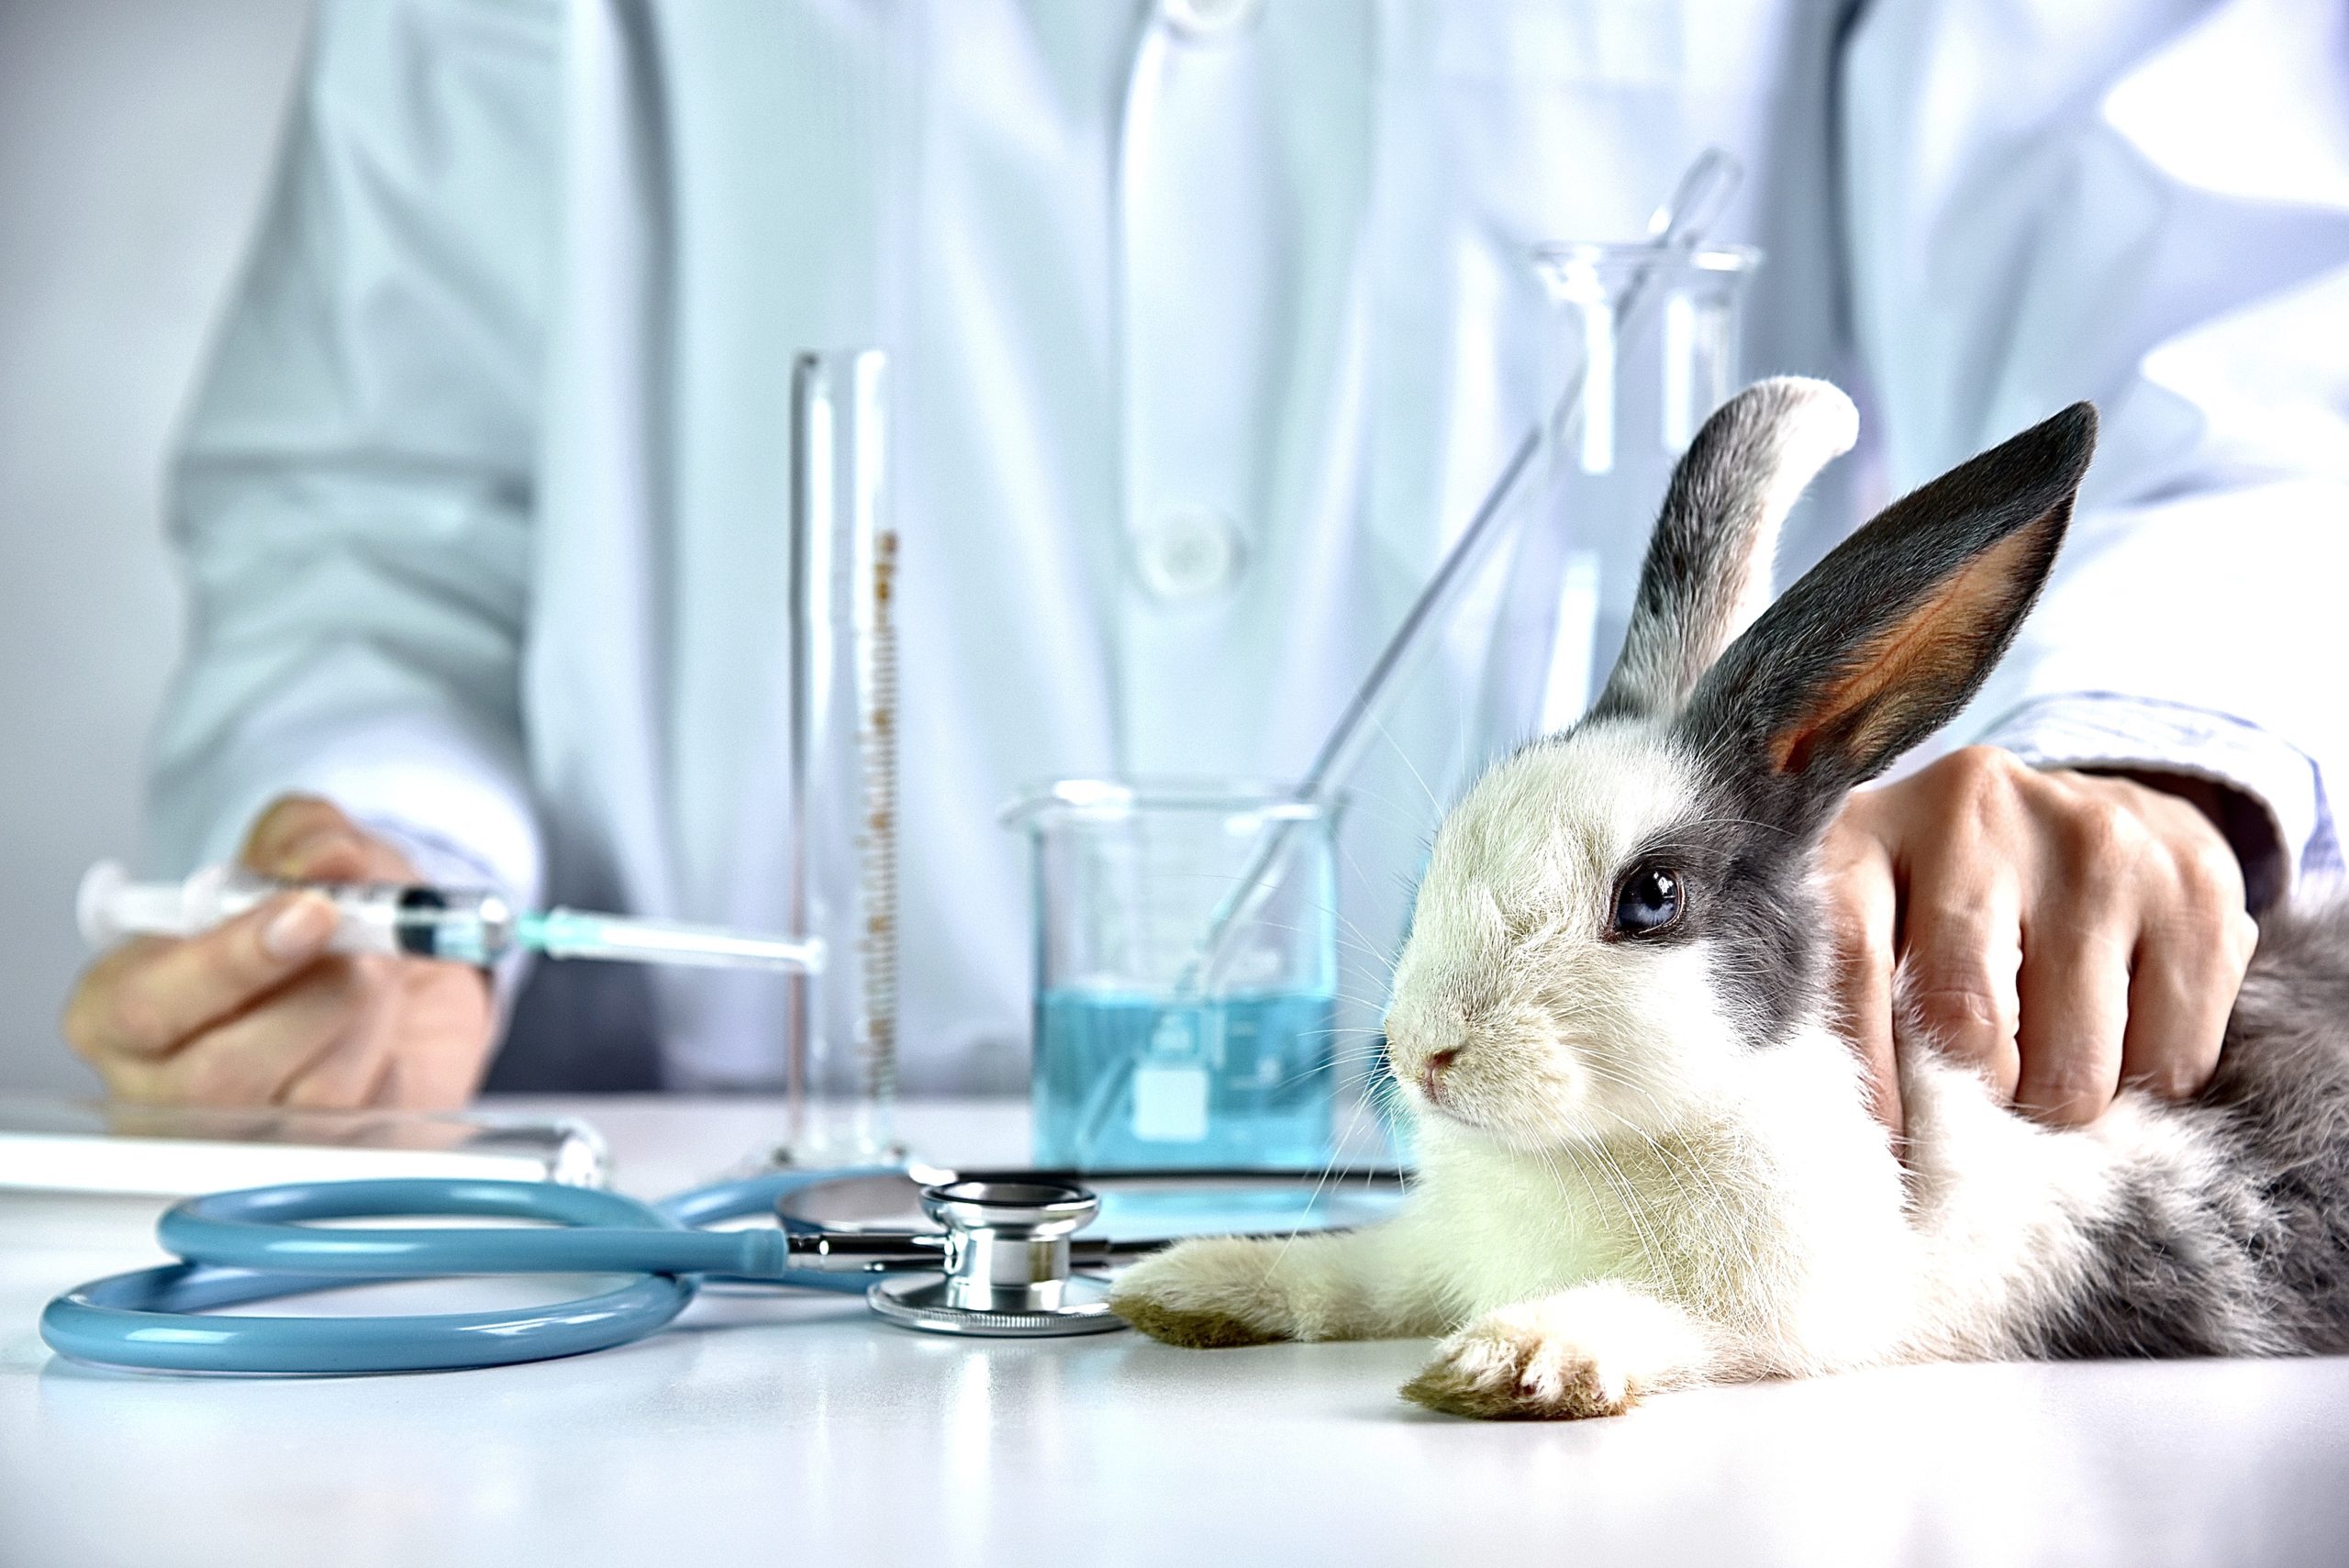 medical research and testing on animals